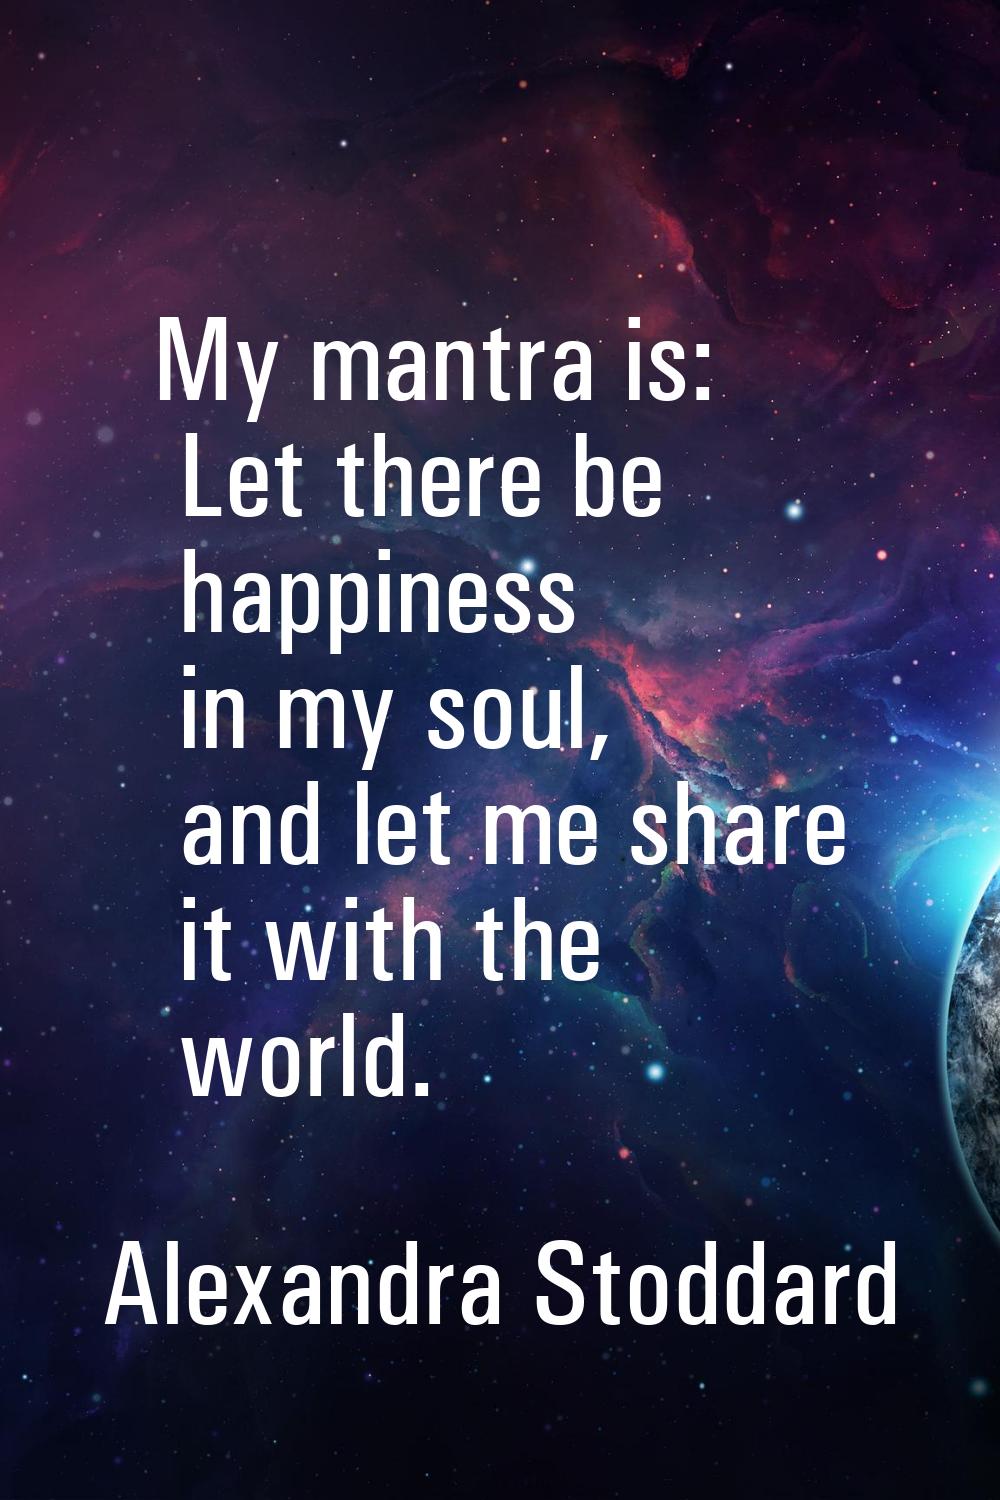 My mantra is: Let there be happiness in my soul, and let me share it with the world.